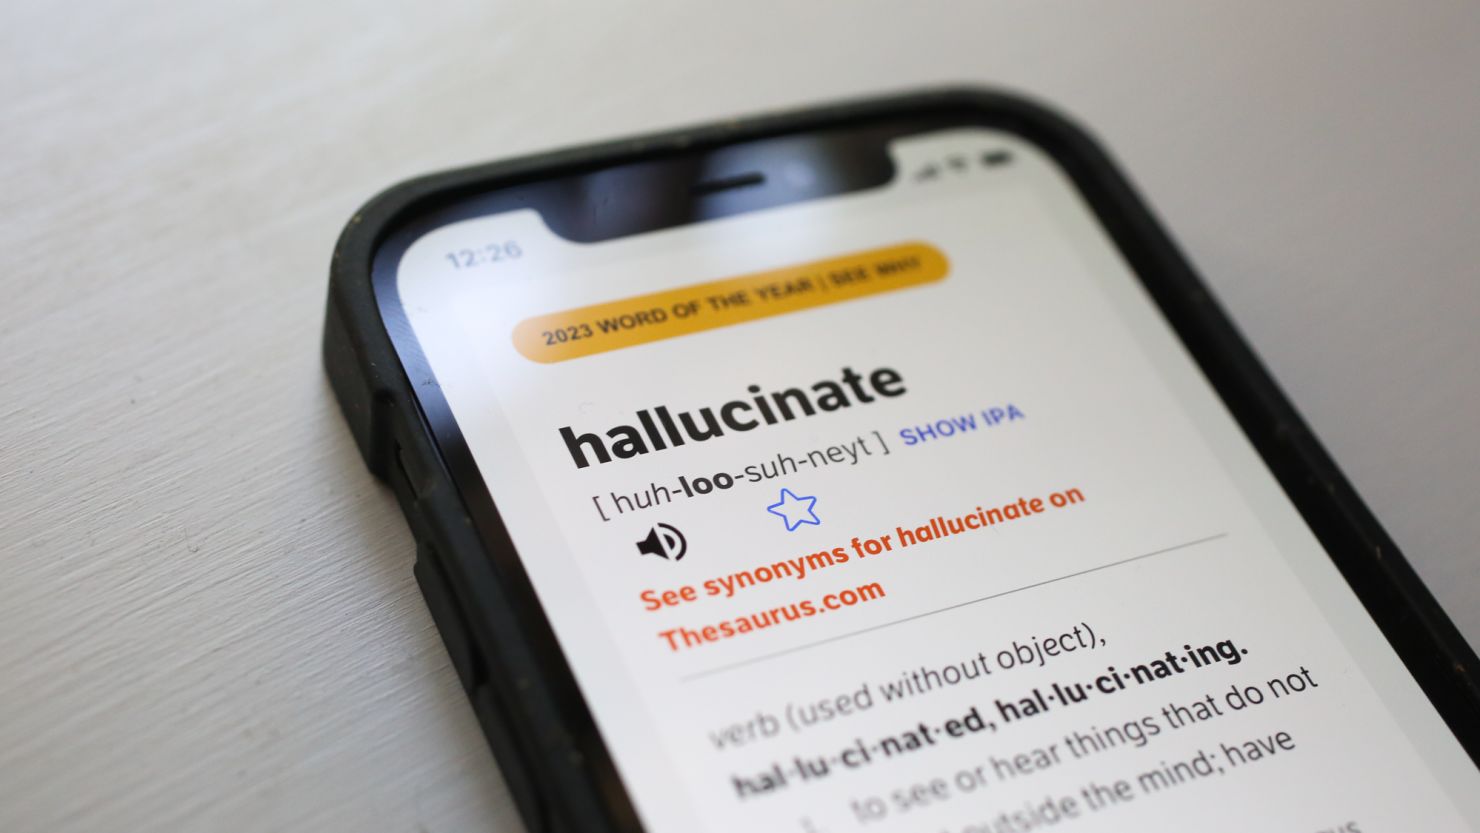 Dictionary.com's word of the year is "hallucinate," referring to the tendency of artificial intelligence tools to spew misinformation.